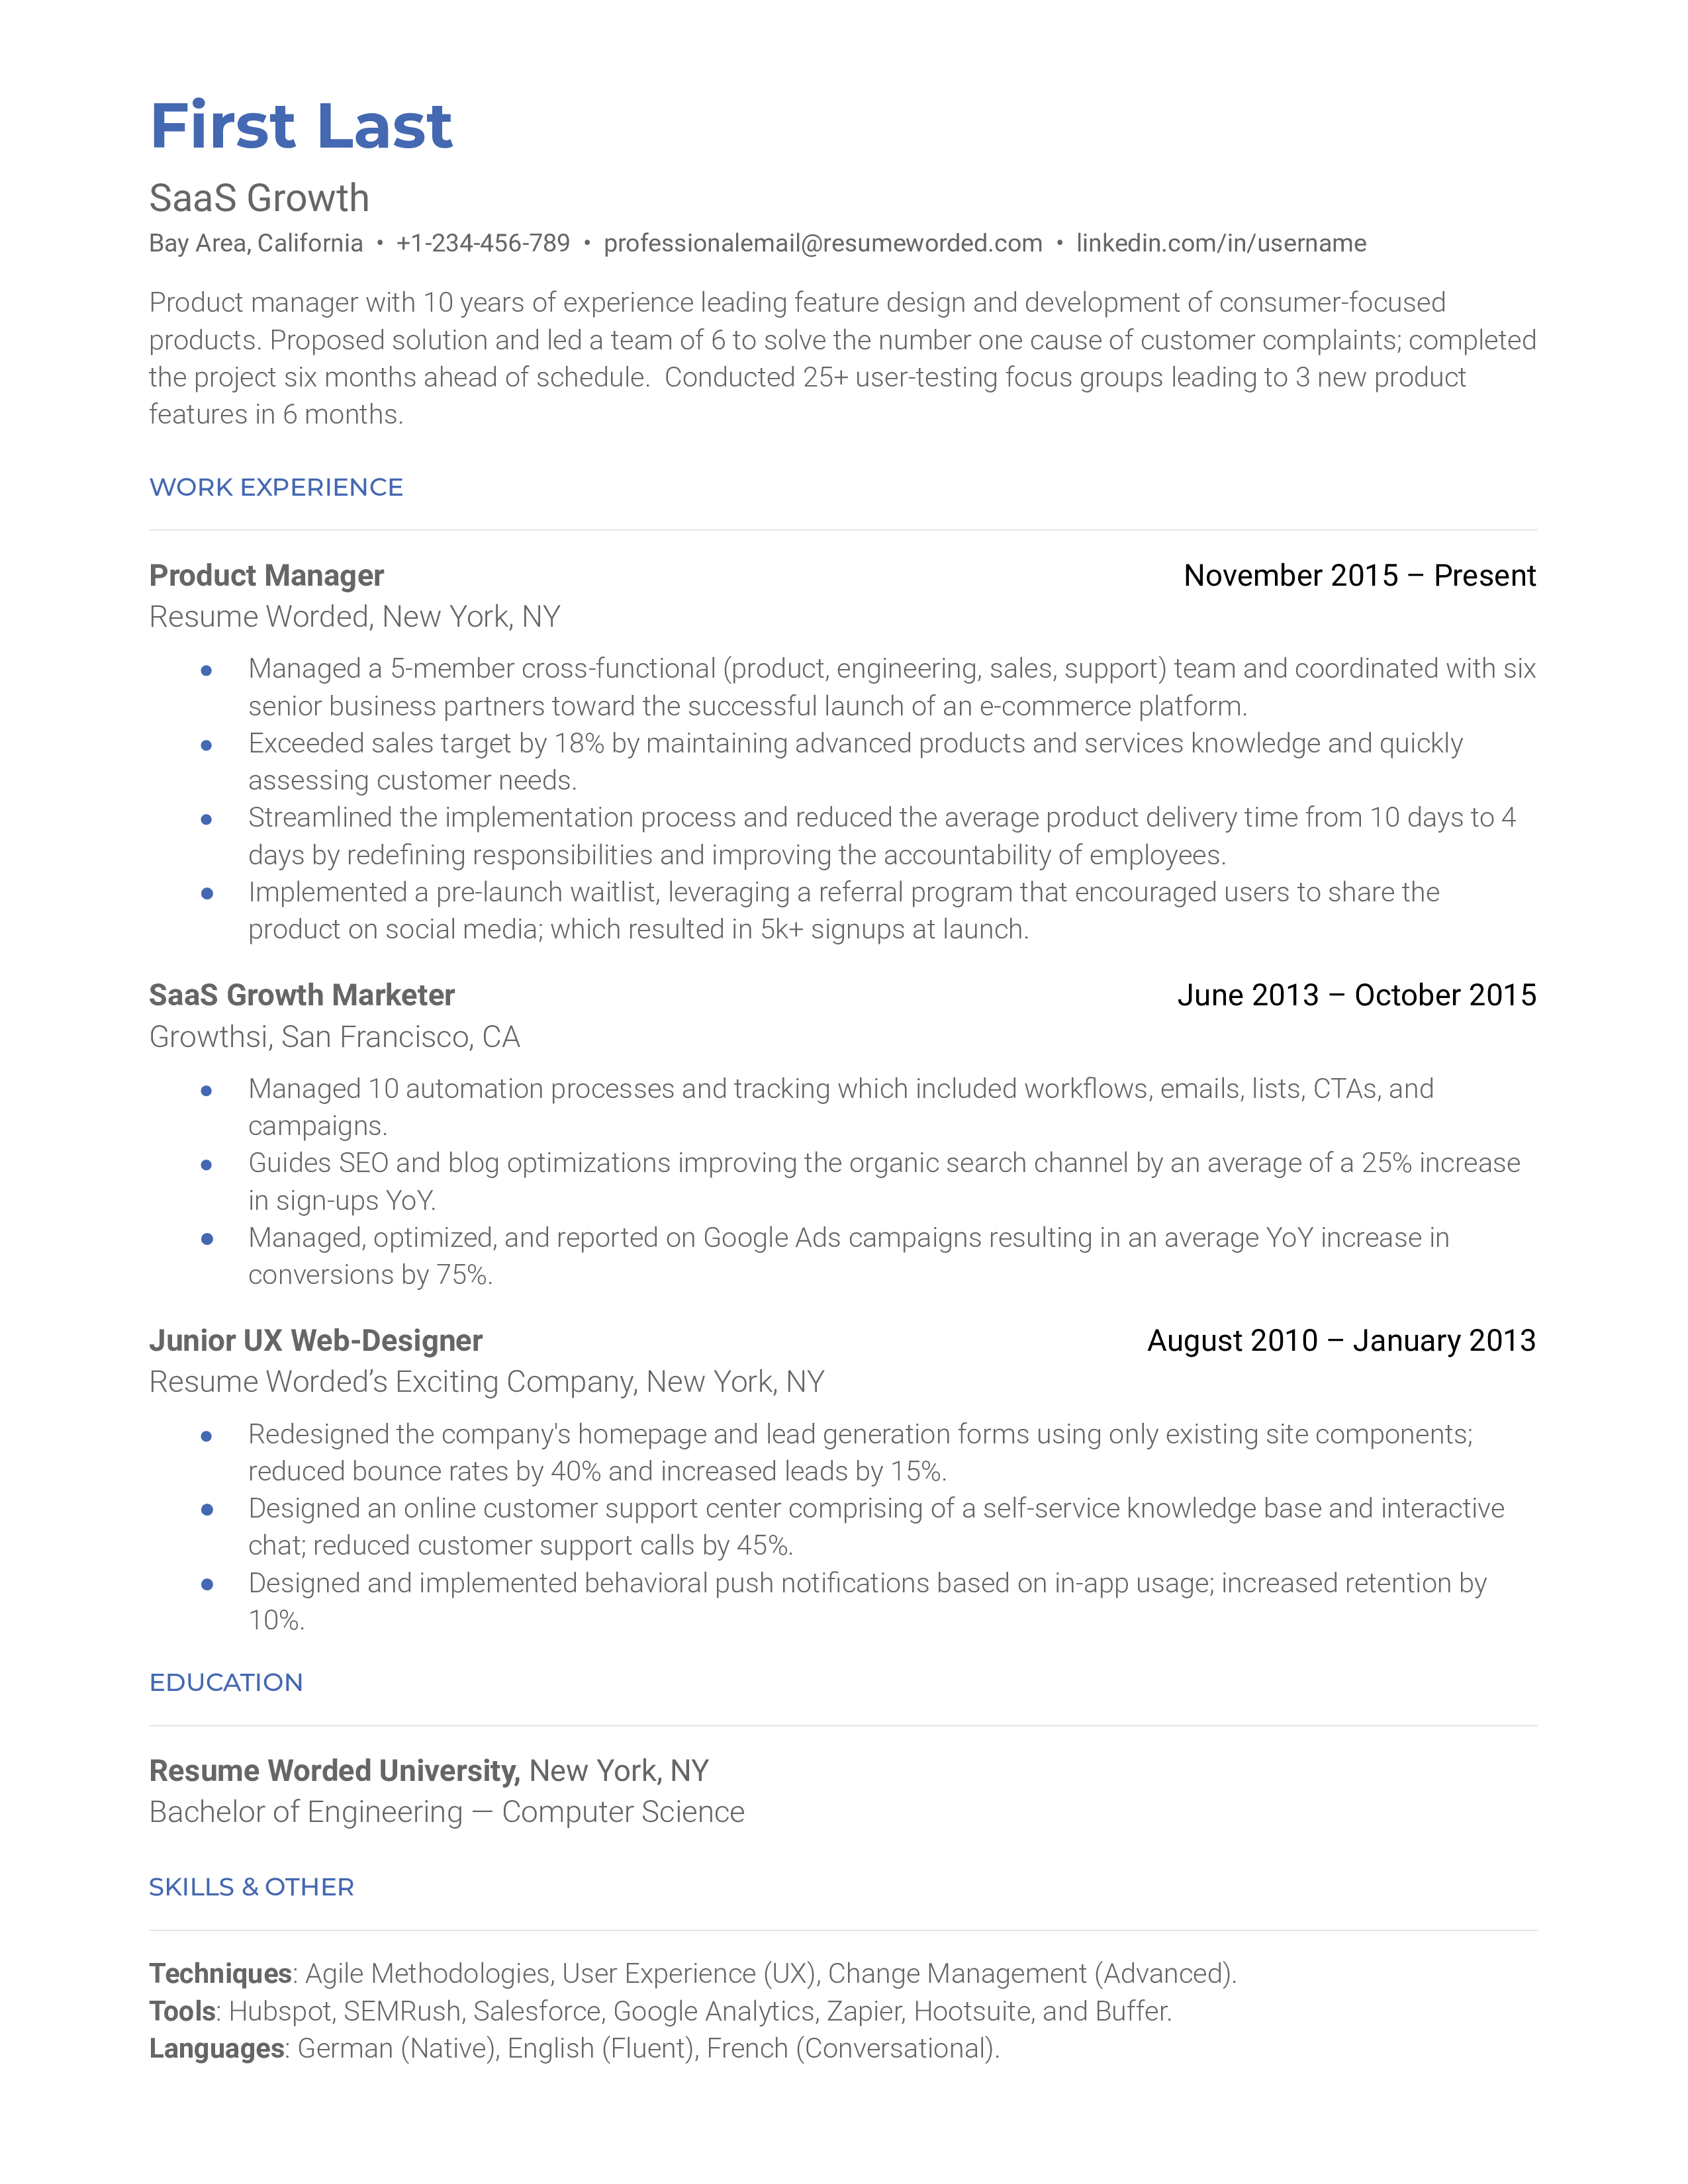 A SaaS growth resume example that showcases industry experience and relevant skills